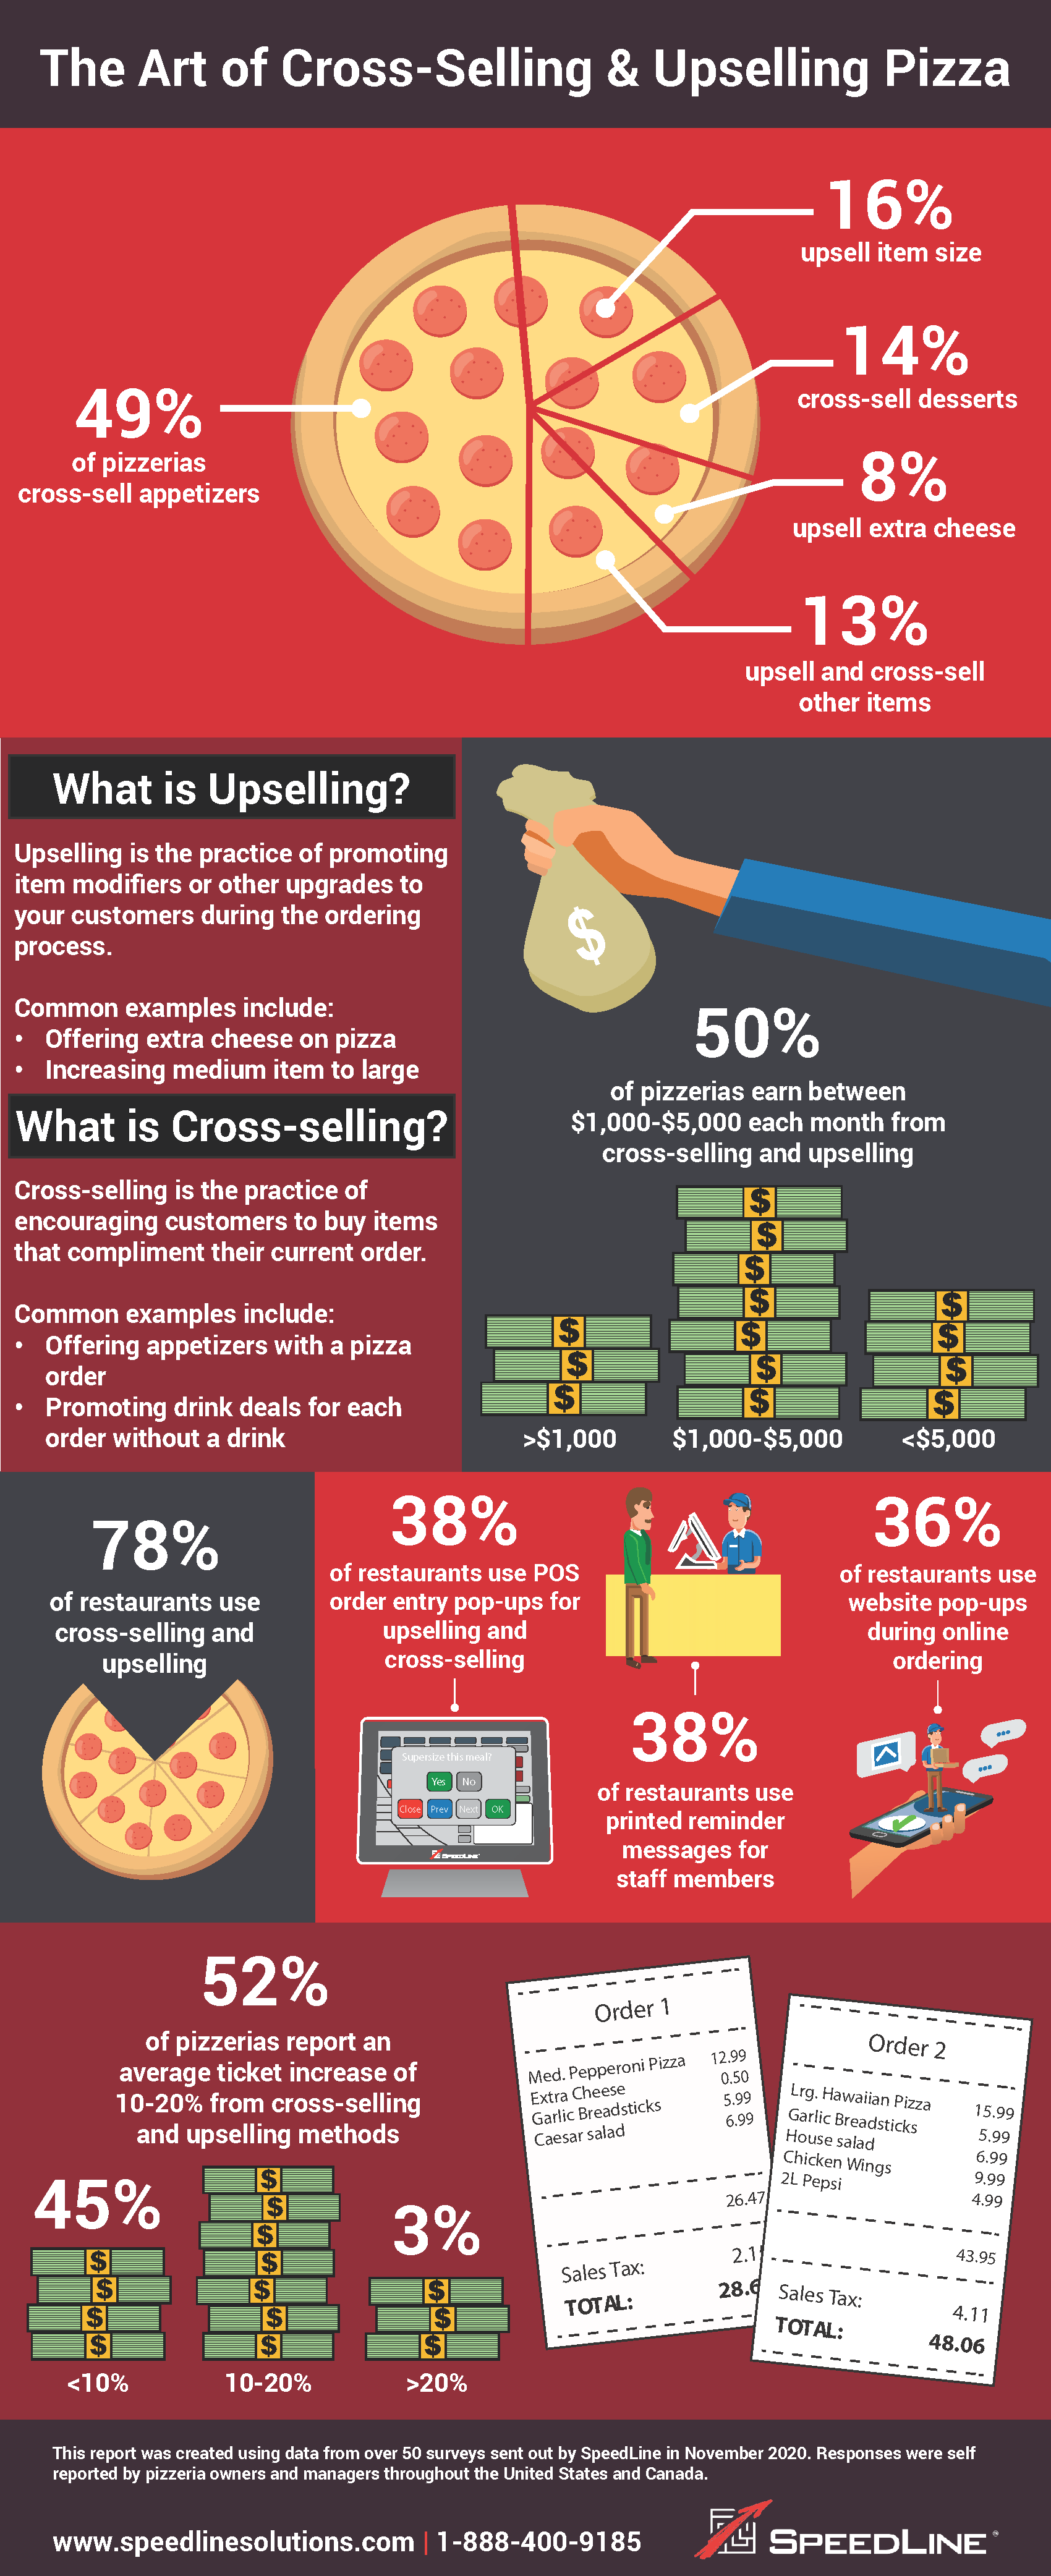 The Art of Cross-Selling & Upselling Pizza: 49% of pizzerias cross-sell appetizers